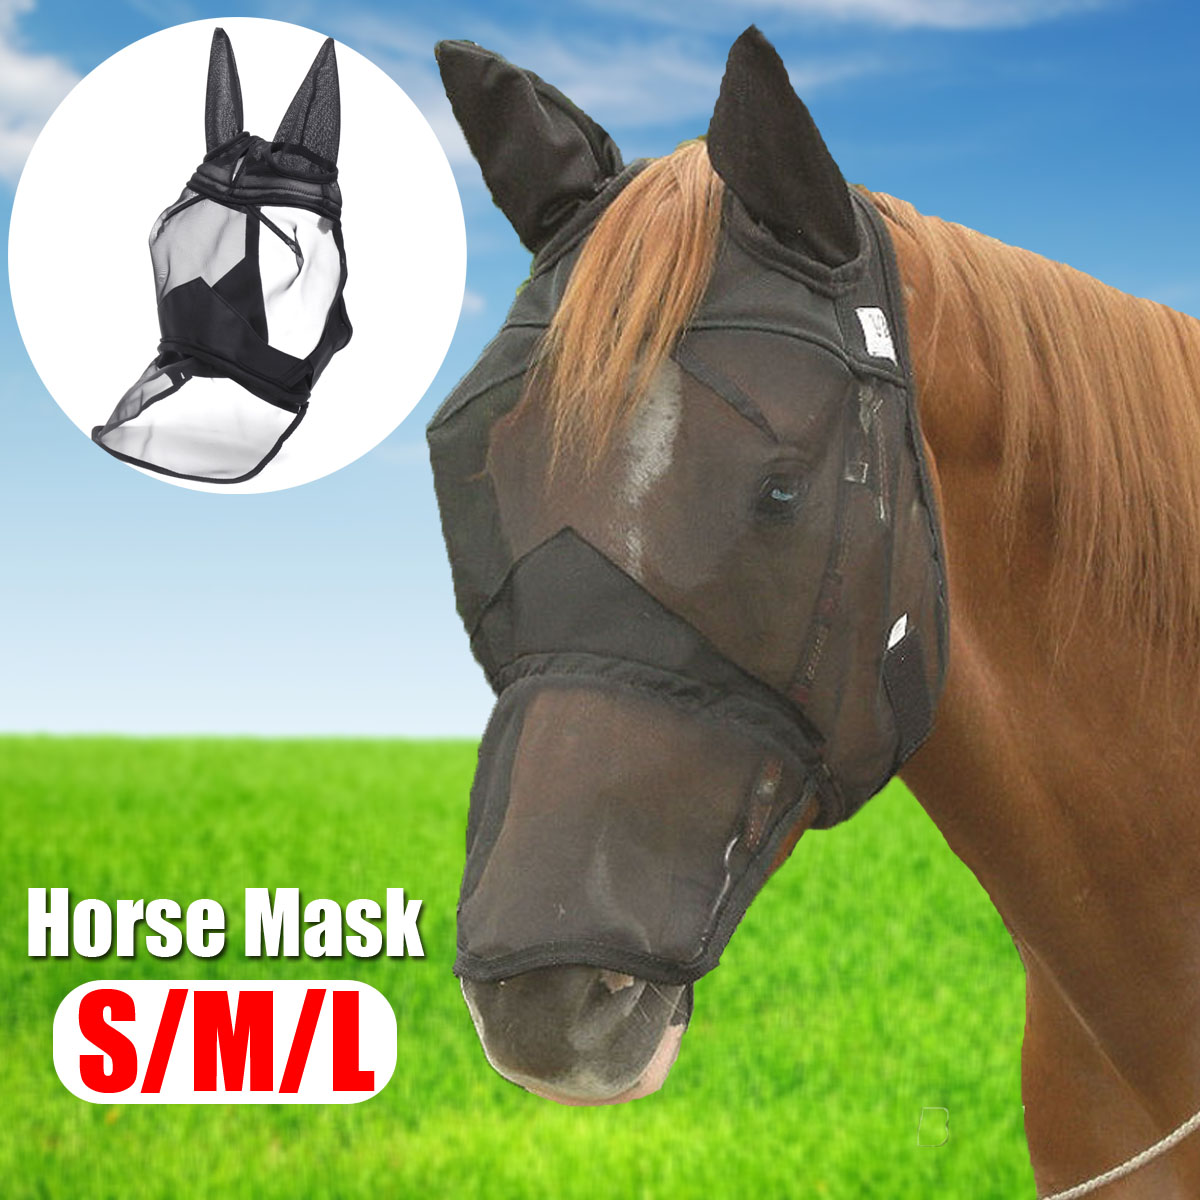 Deluxe-Horse-Fly-Mask-with-Ears-Mesh-Anti-mosquito-Zipper-Style-PonyCobFull-Horse-Spurs-1633817-1